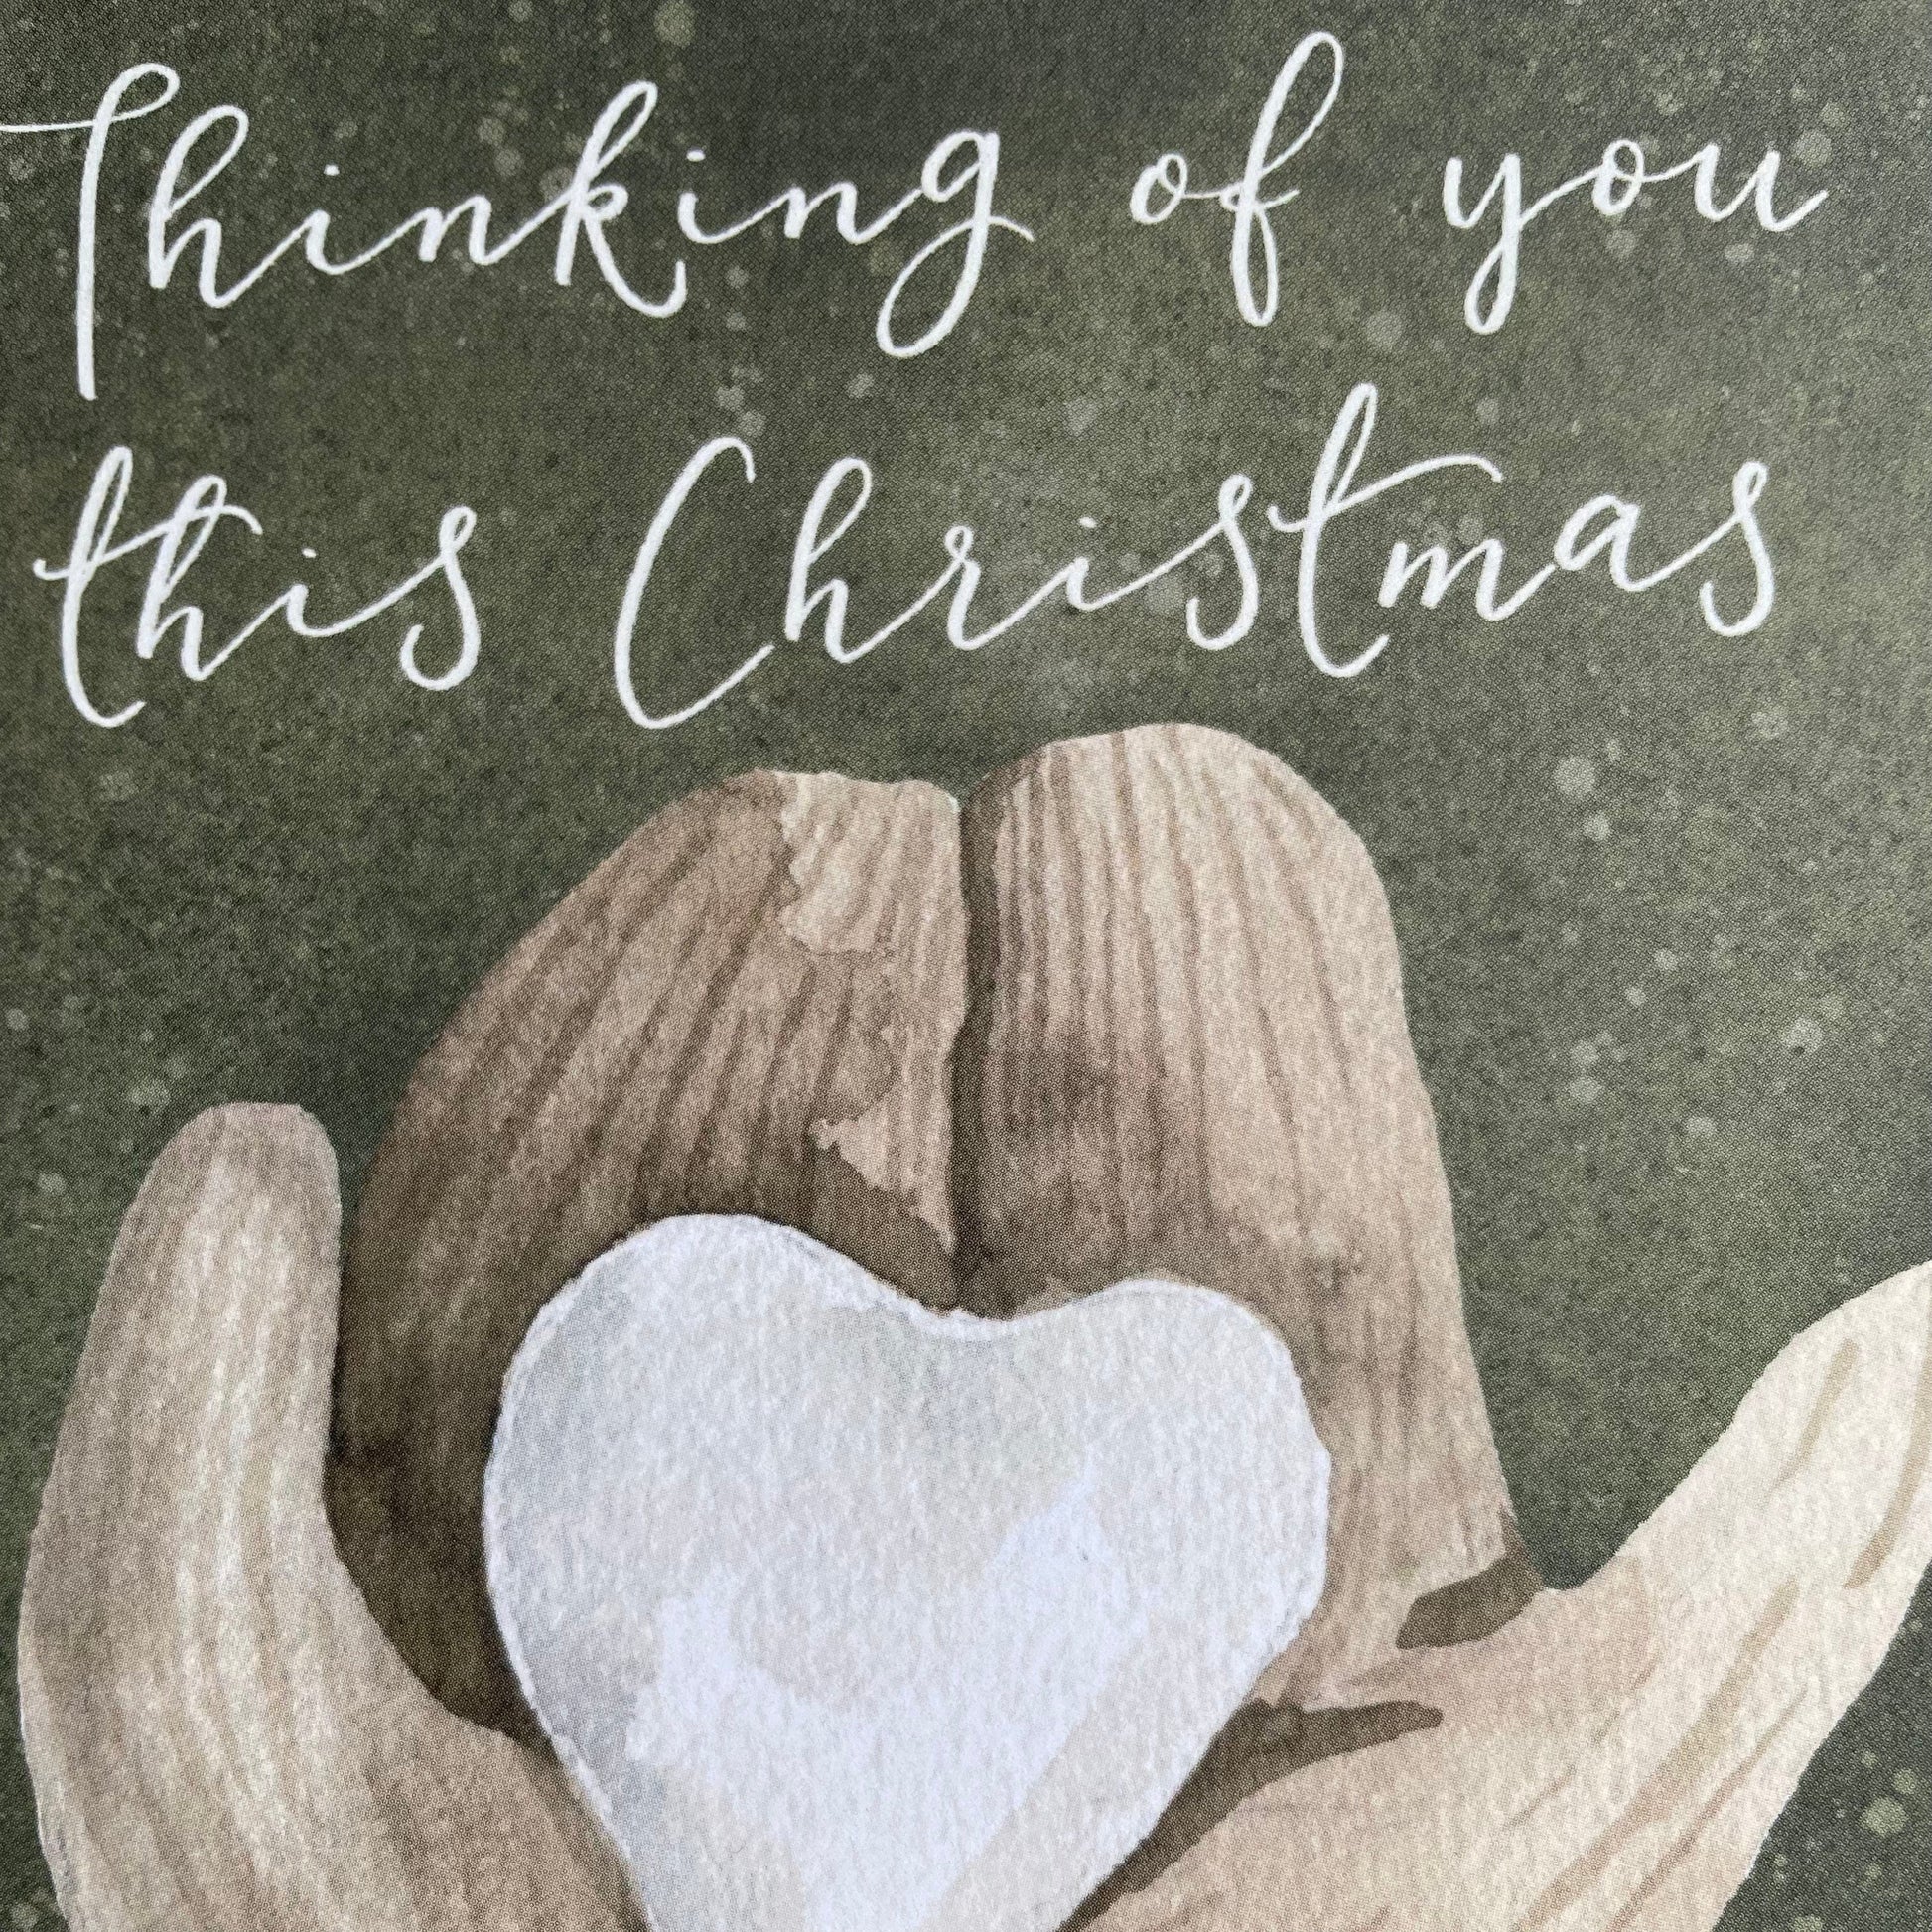 Thinking of you this Christmas card Cards And Hope Designs   